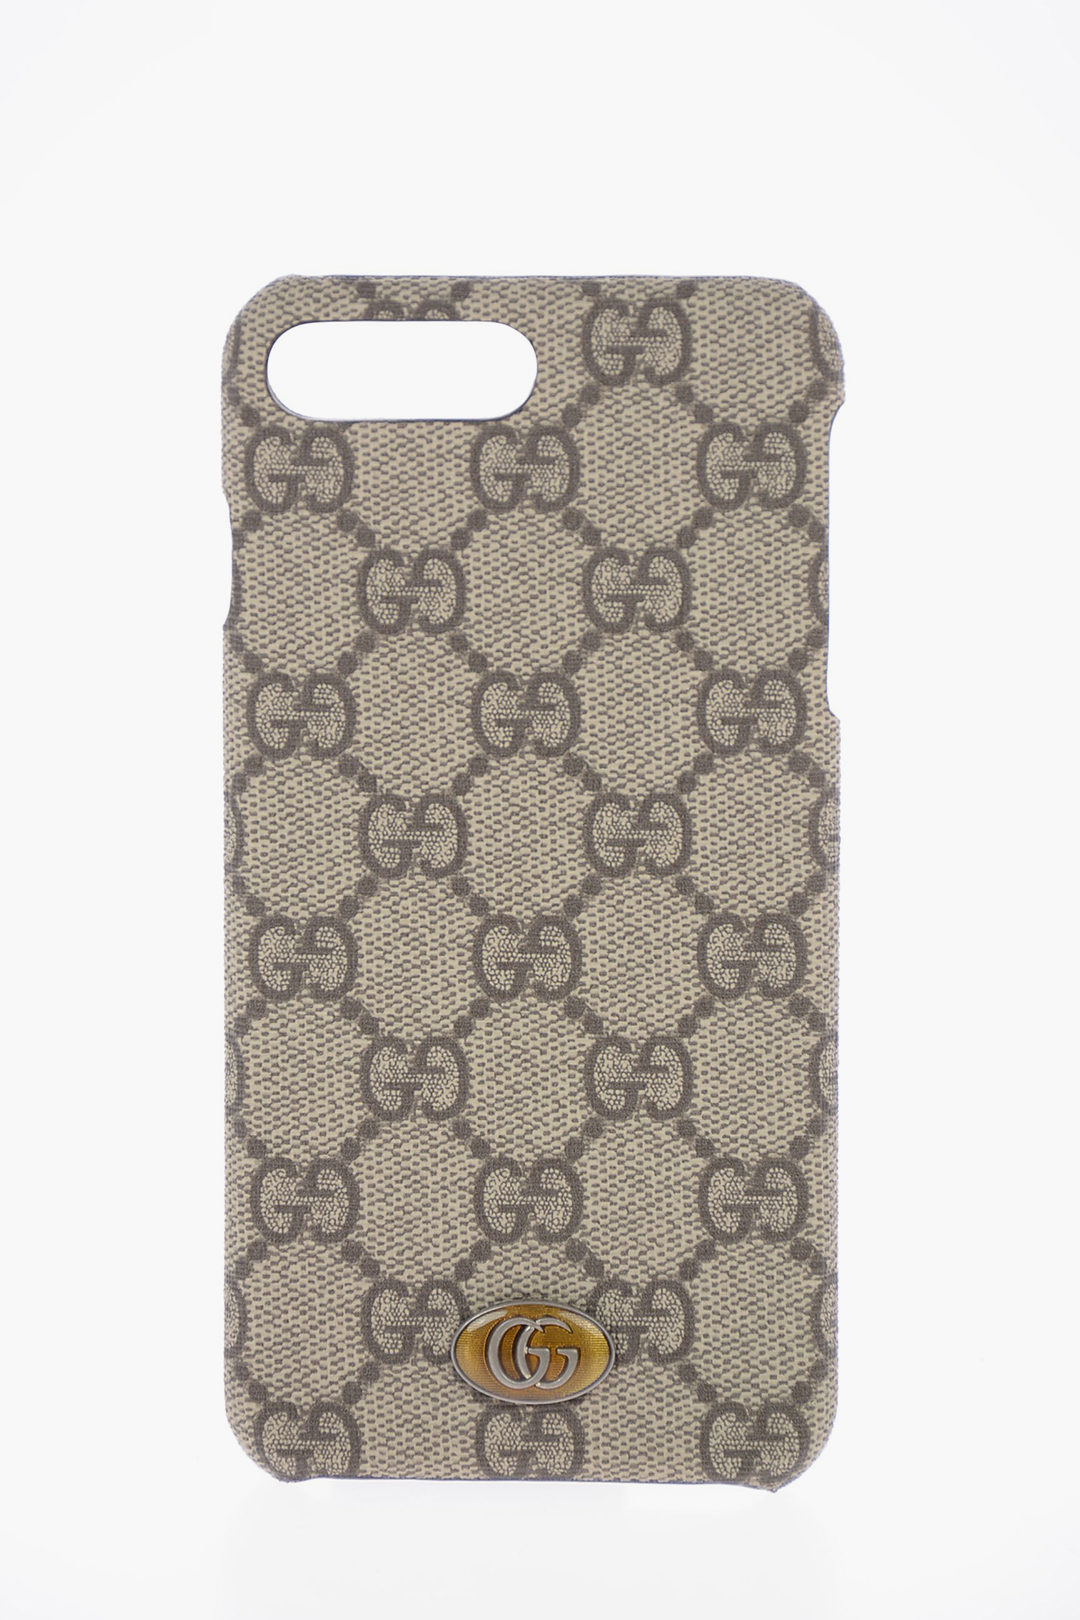 Gucci Logo Printed Iphone 8 Plus Cover Unisex Men Women Glamood Outlet